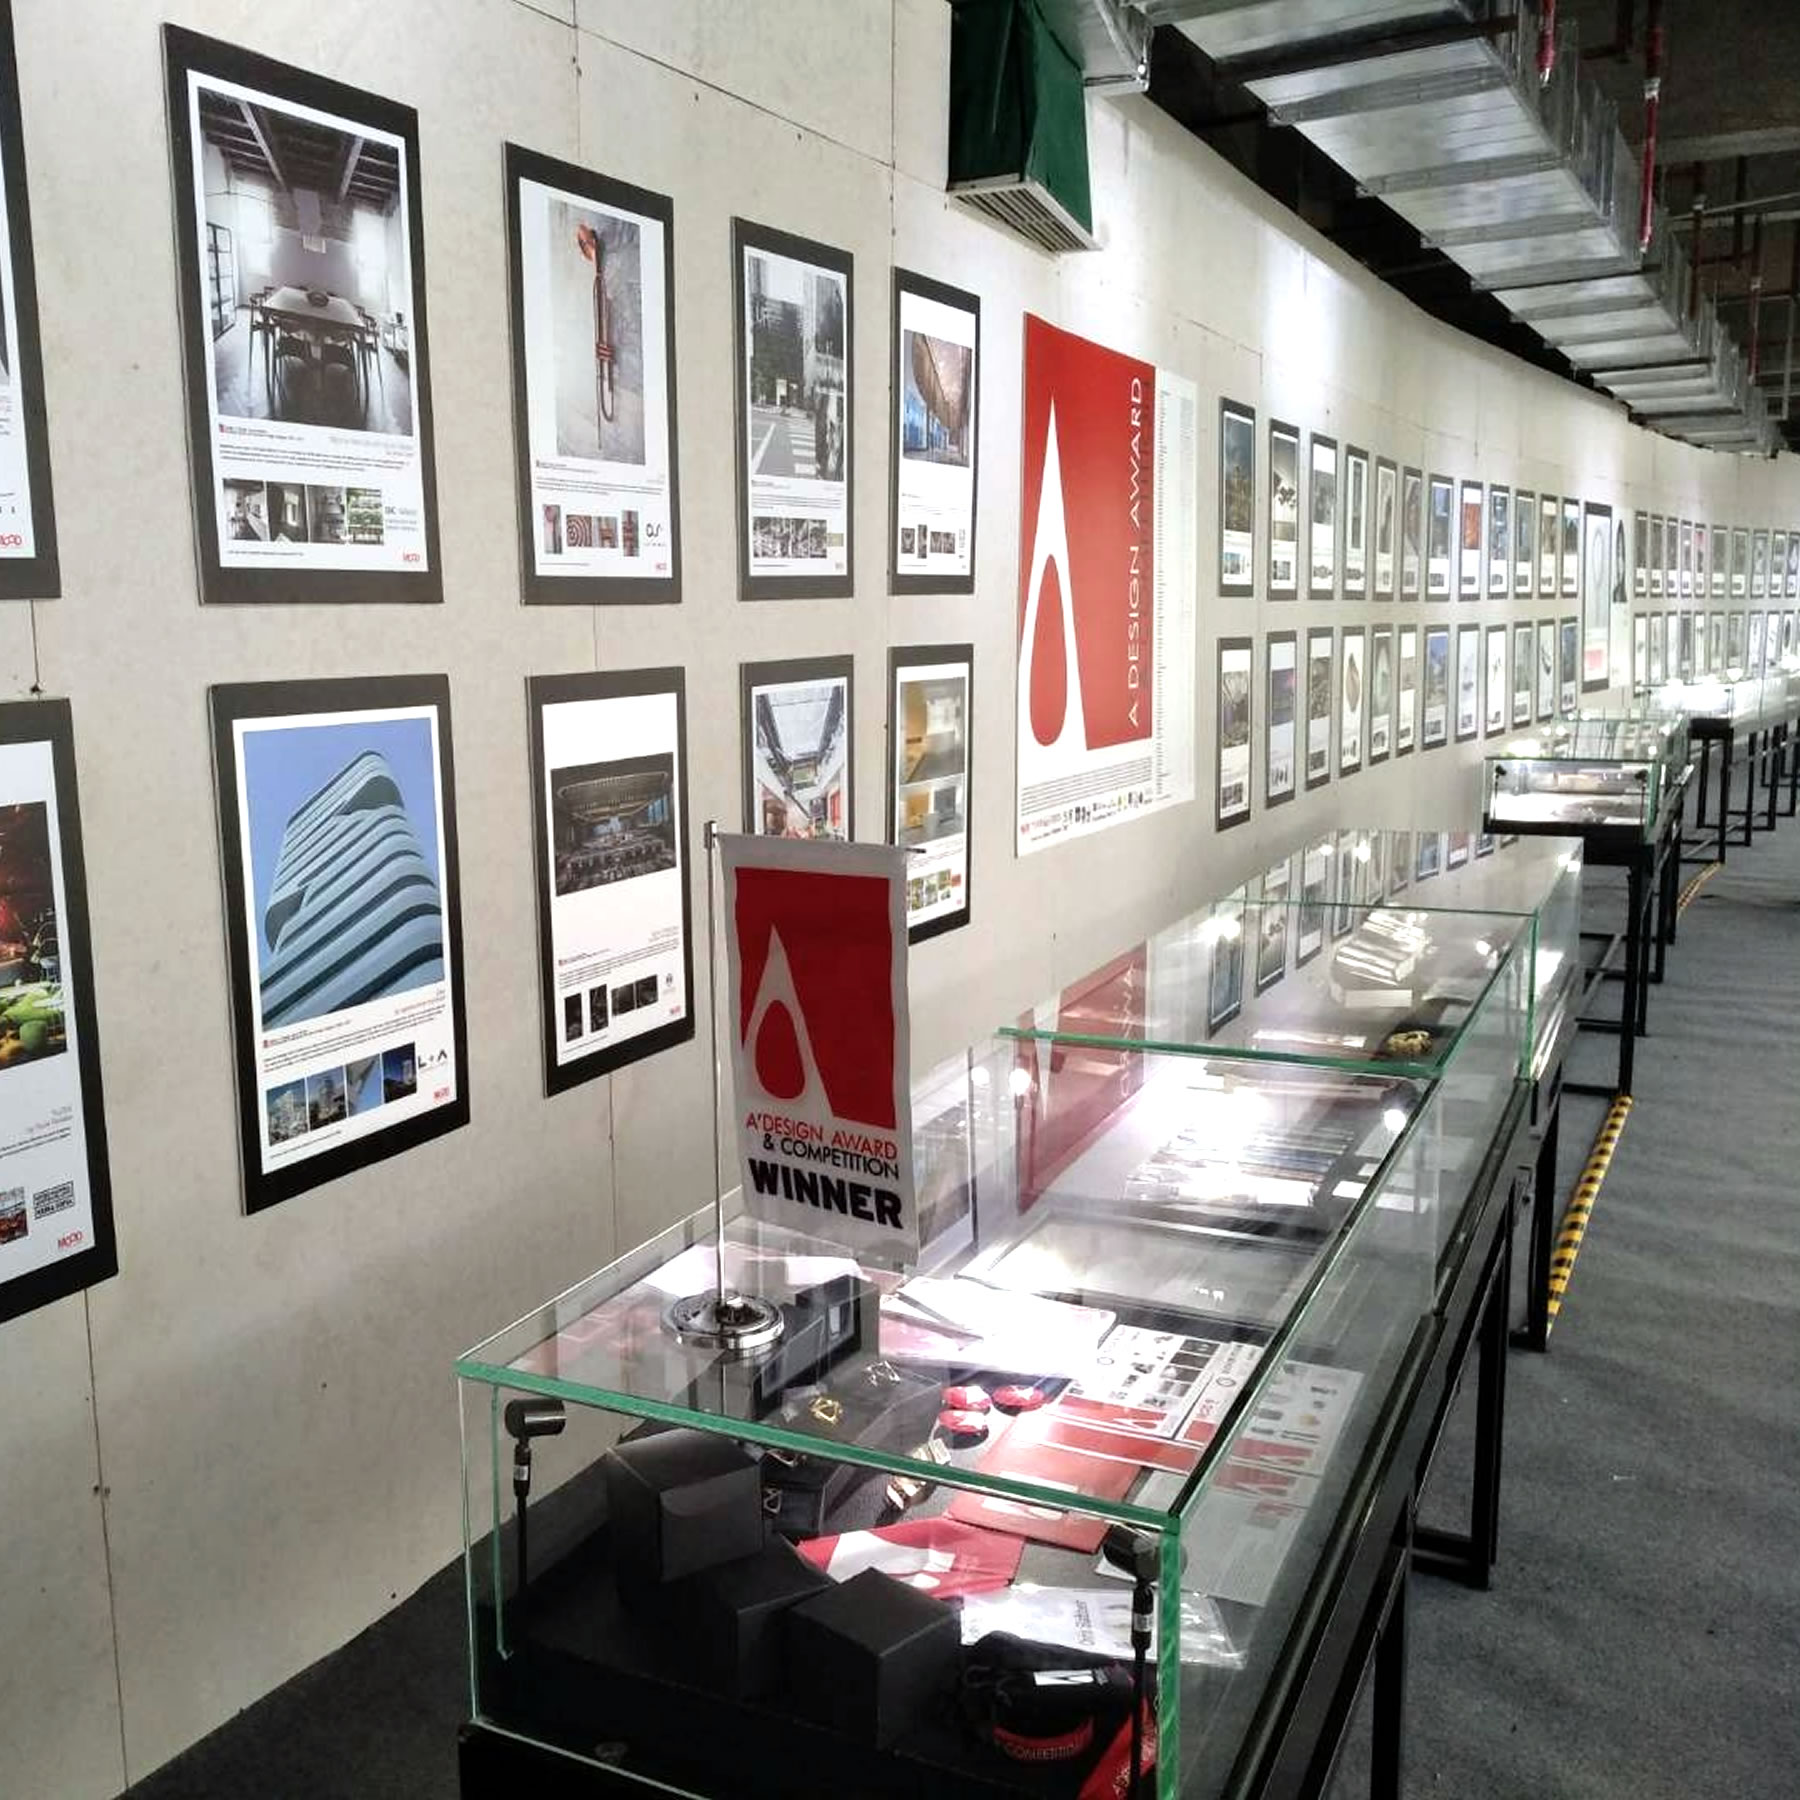 Exhibition of awarded designs in China